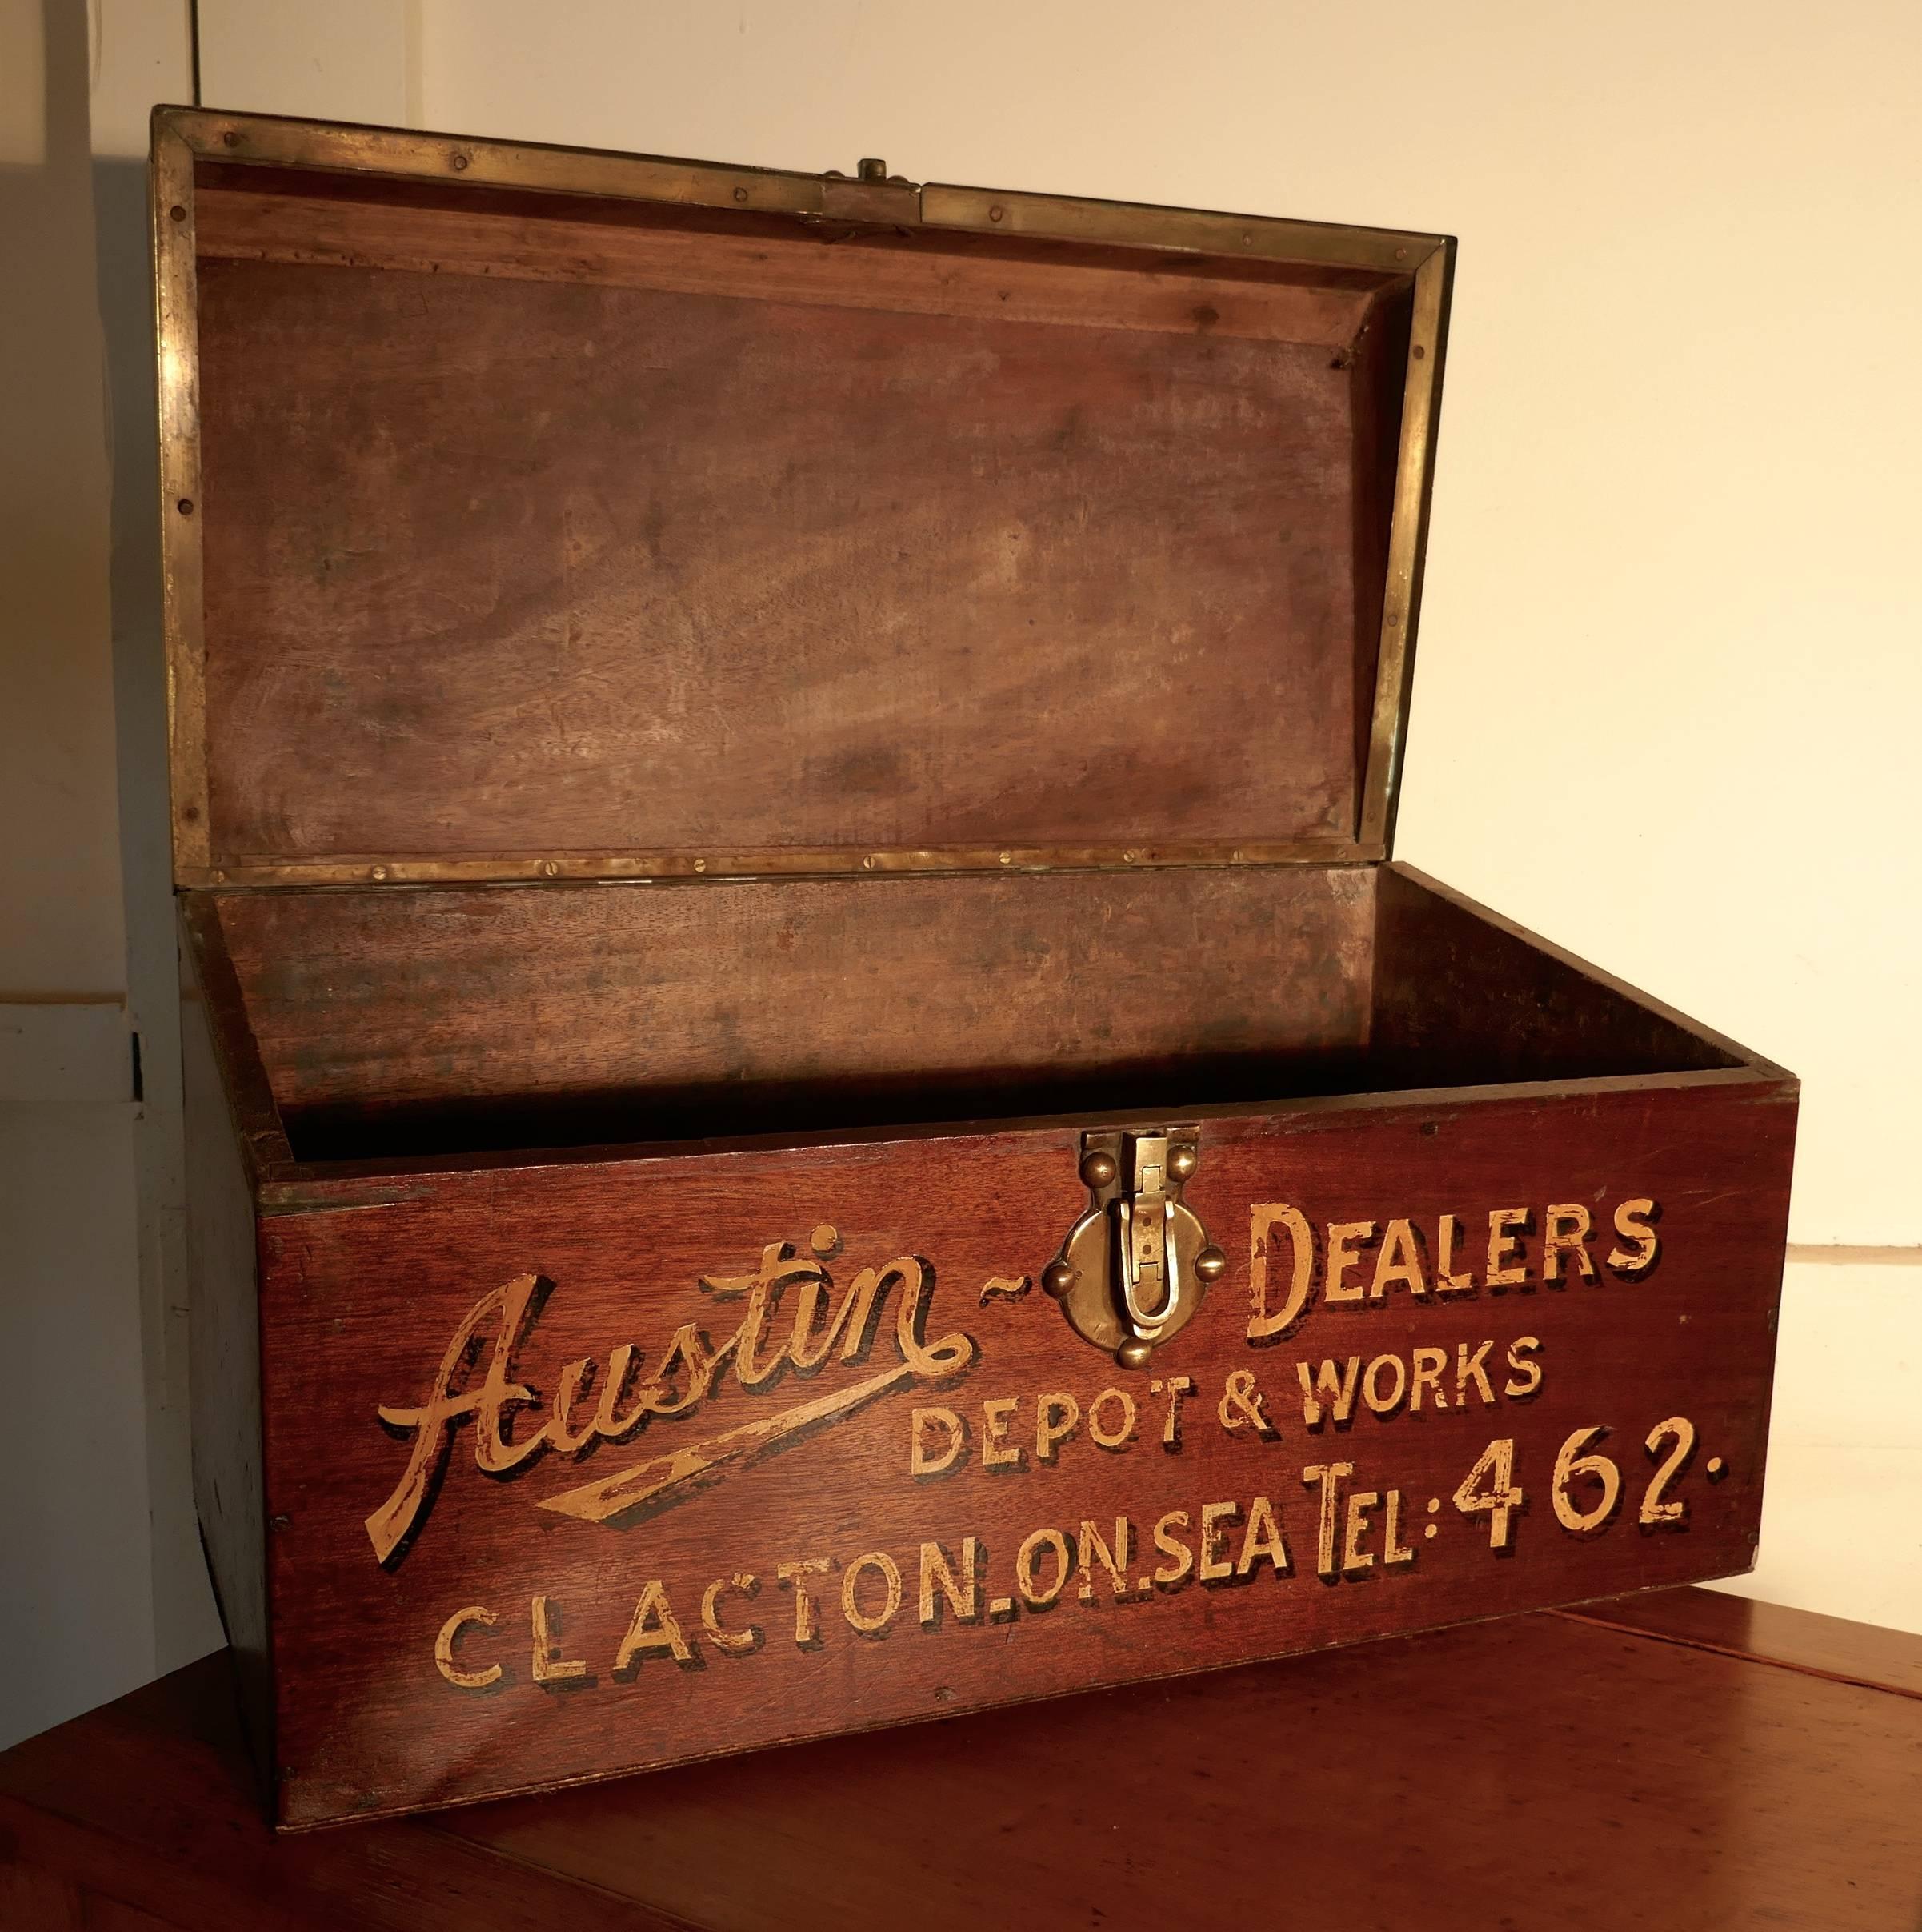 Mahogany automobile running board tool box for vintage car

This is a very rare mahogany tool box, which would have been strapped to the running board of a Vintage car. 
This is a very strong box with a curved design and brass fittings, it is in